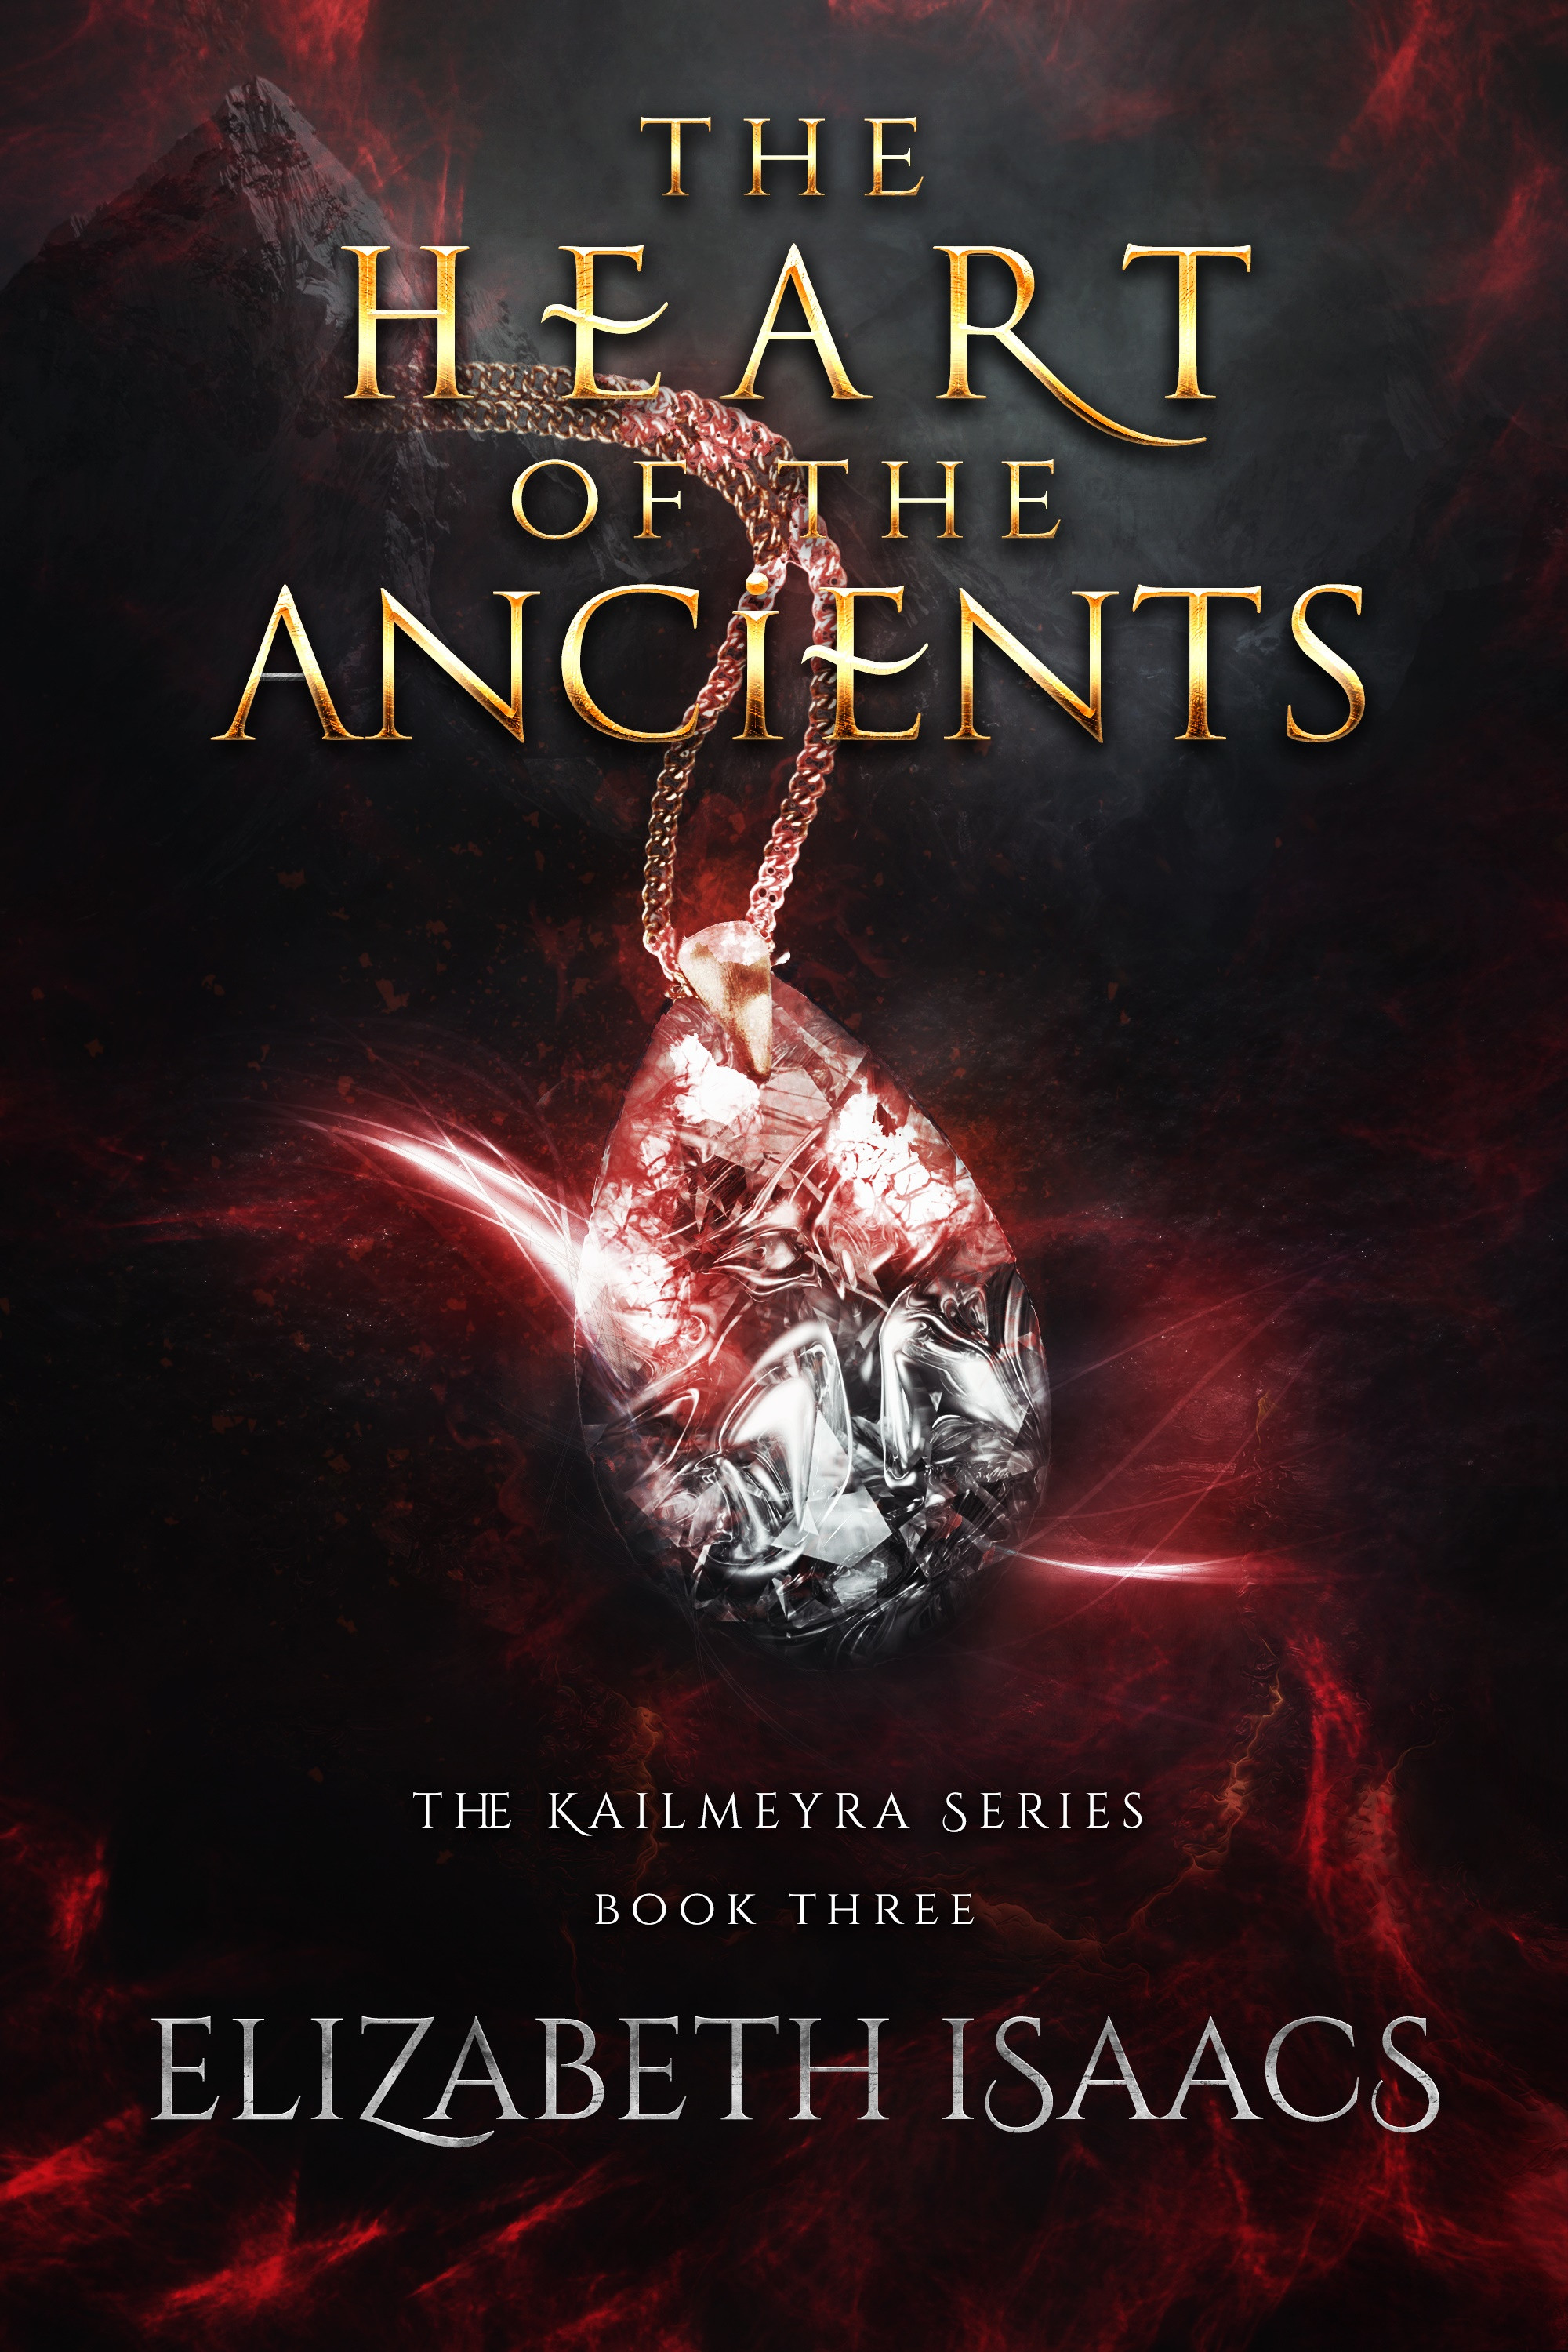 The Heart of the Ancients